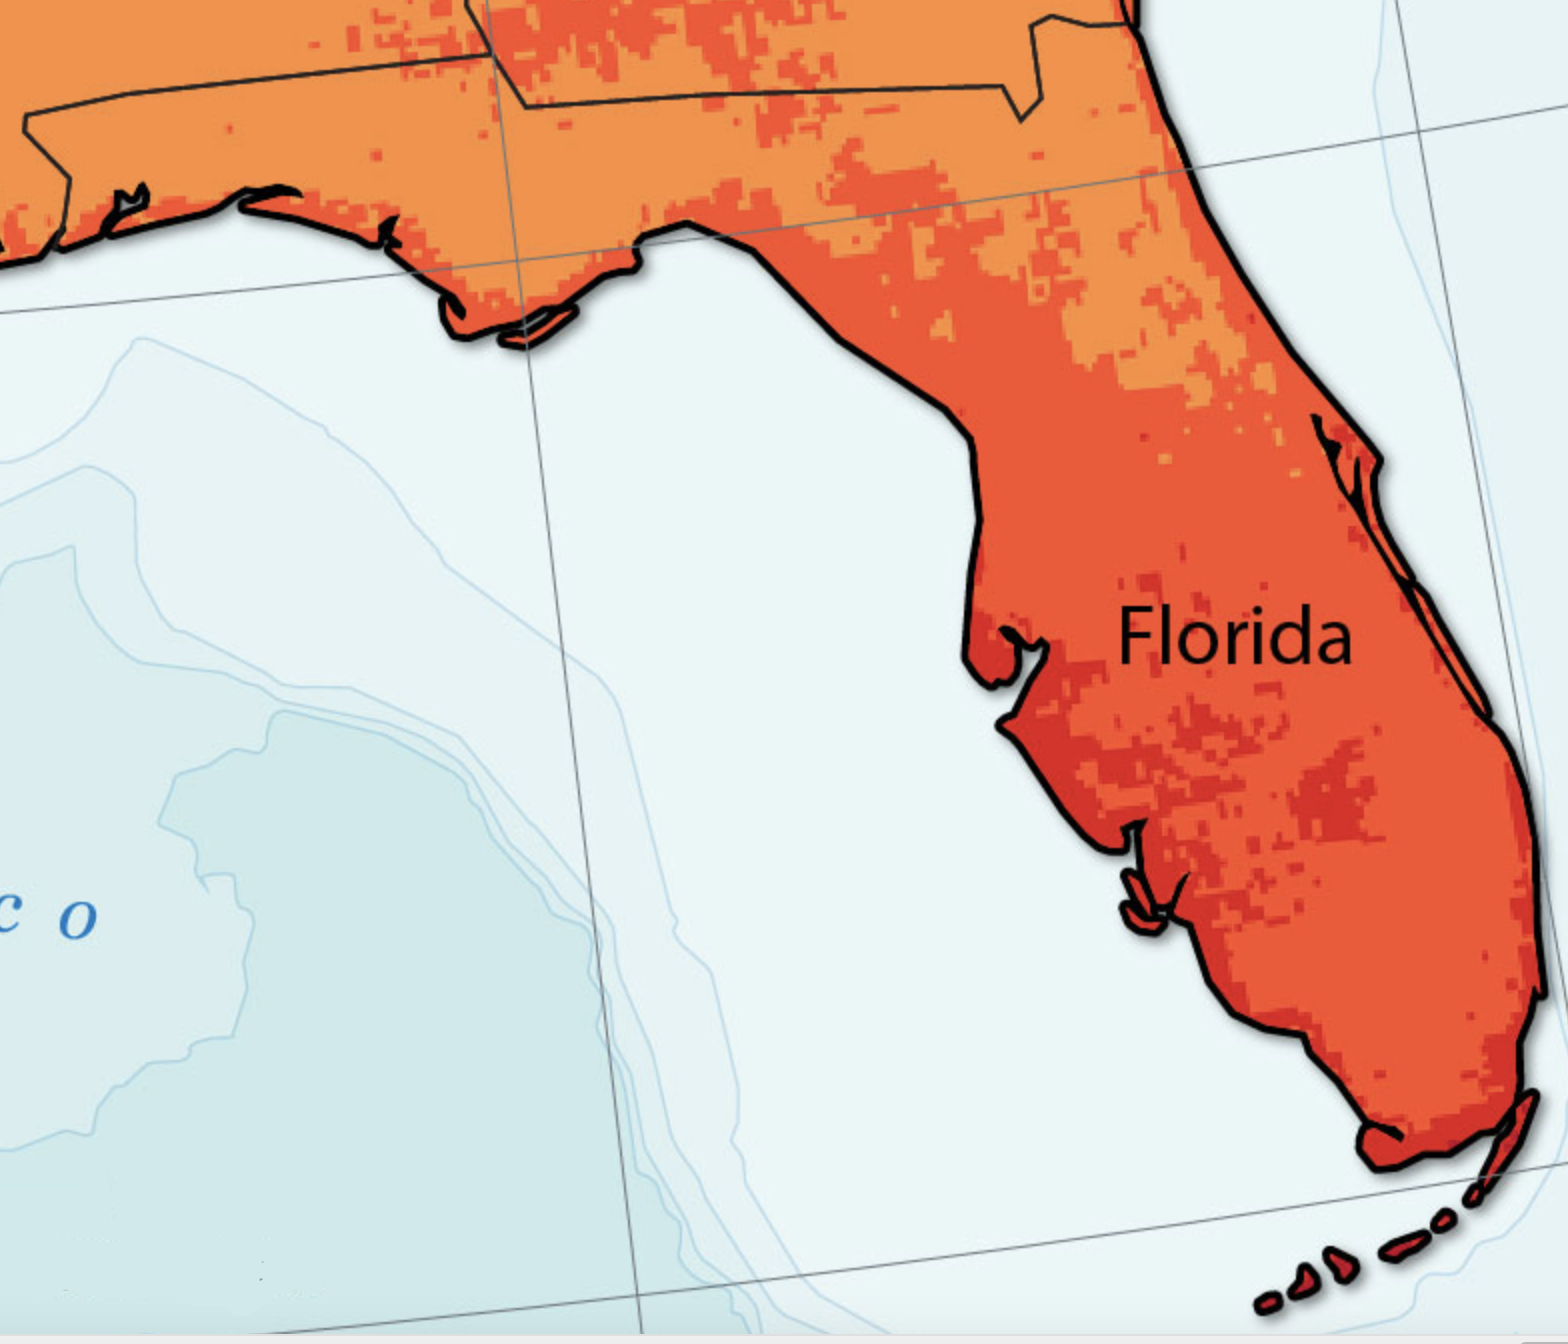 Annual average daily solar energy resources in Florida. Lighter shades indicate less solar energy available, darker shades indicate more. Map courtesy of the National Renewable Energy Laboratory.